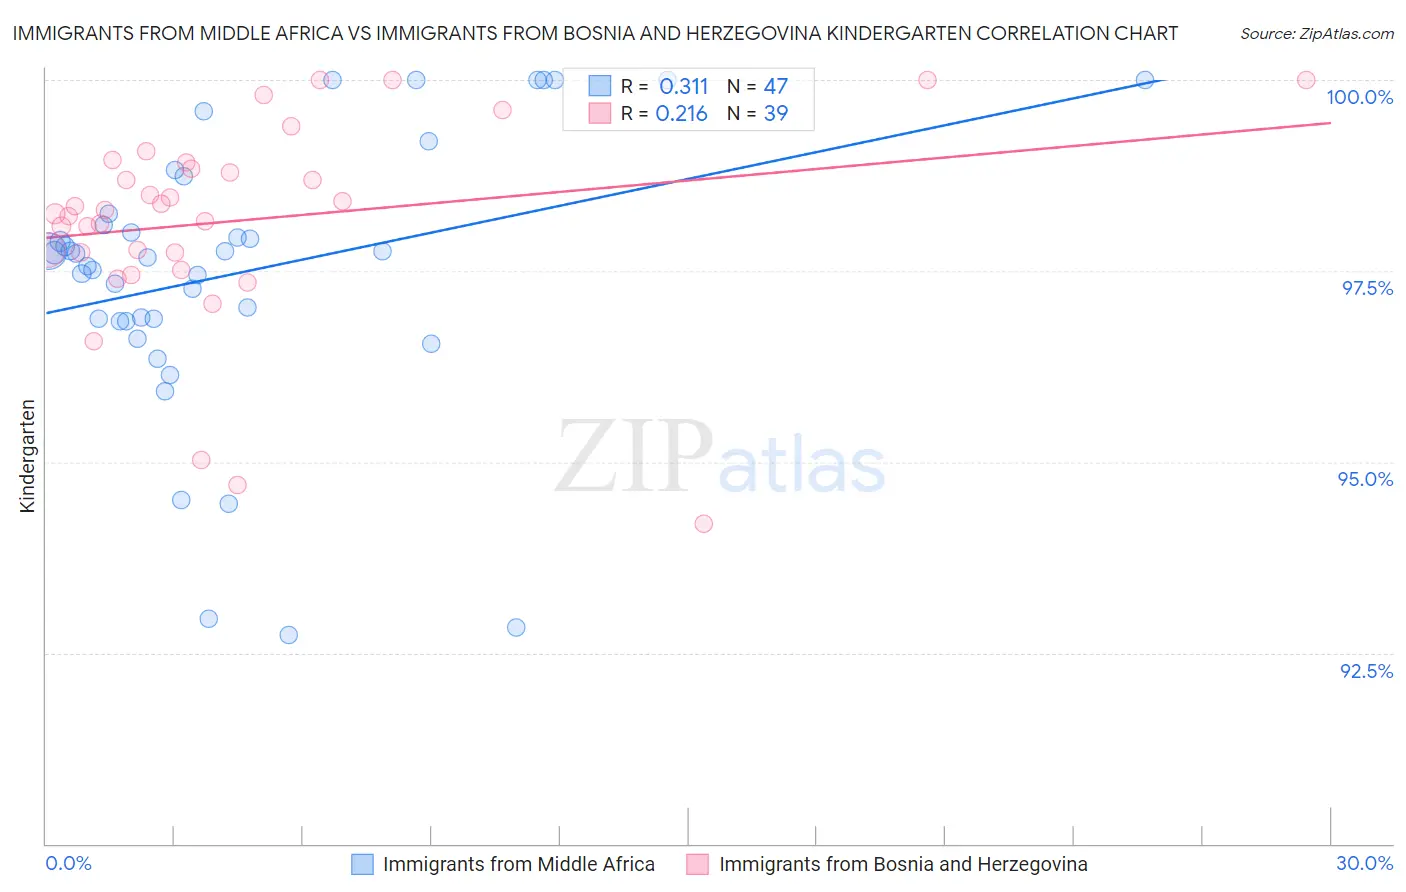 Immigrants from Middle Africa vs Immigrants from Bosnia and Herzegovina Kindergarten